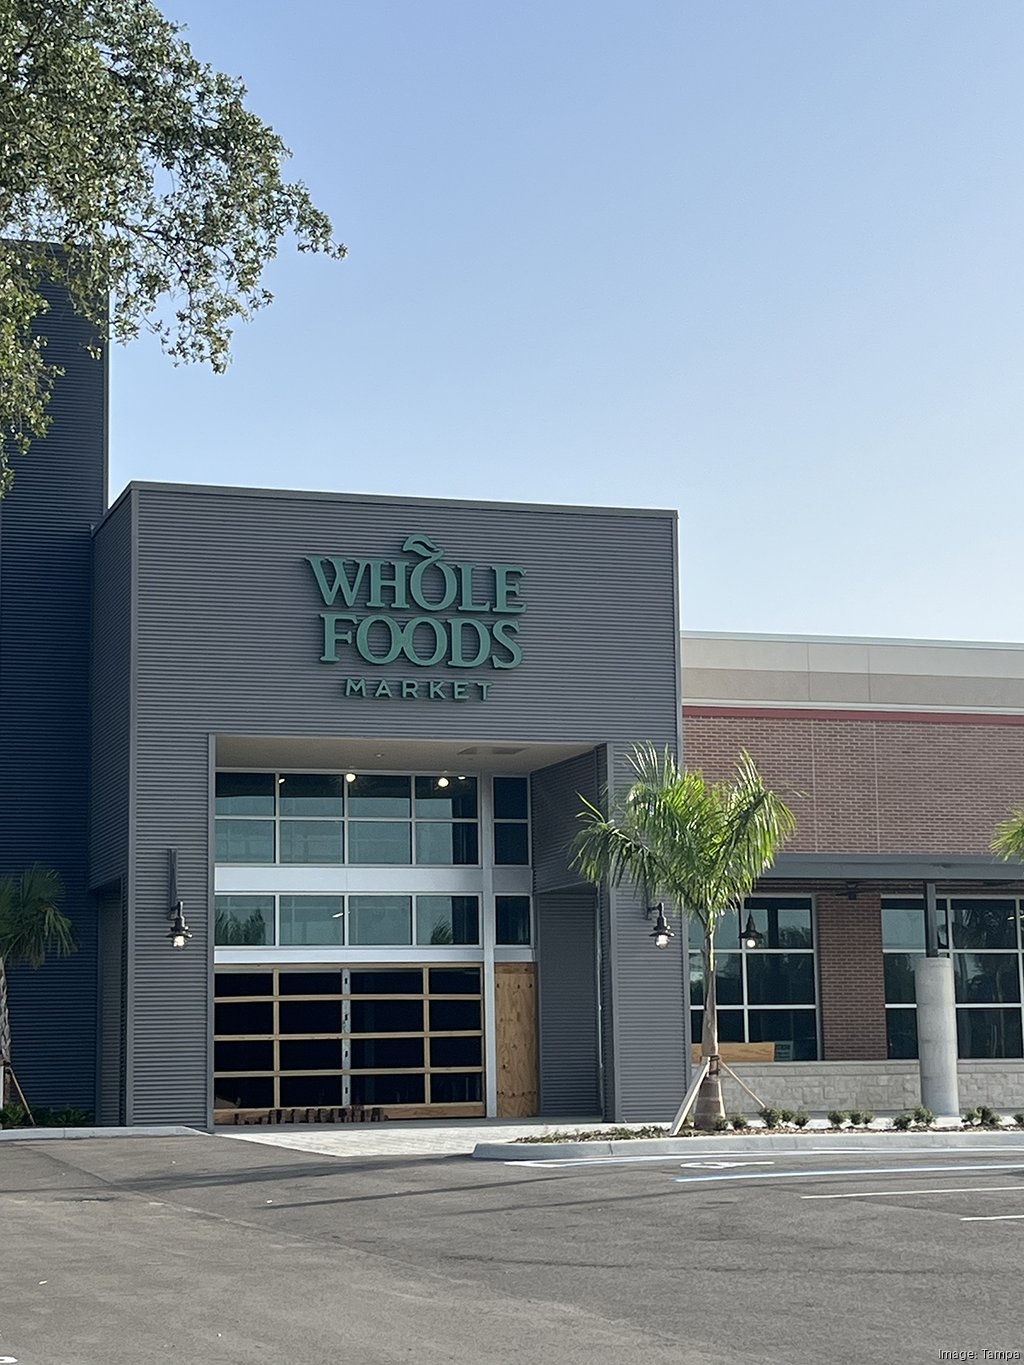 Whole Foods Market now open, the first-ever St. Pete location - I